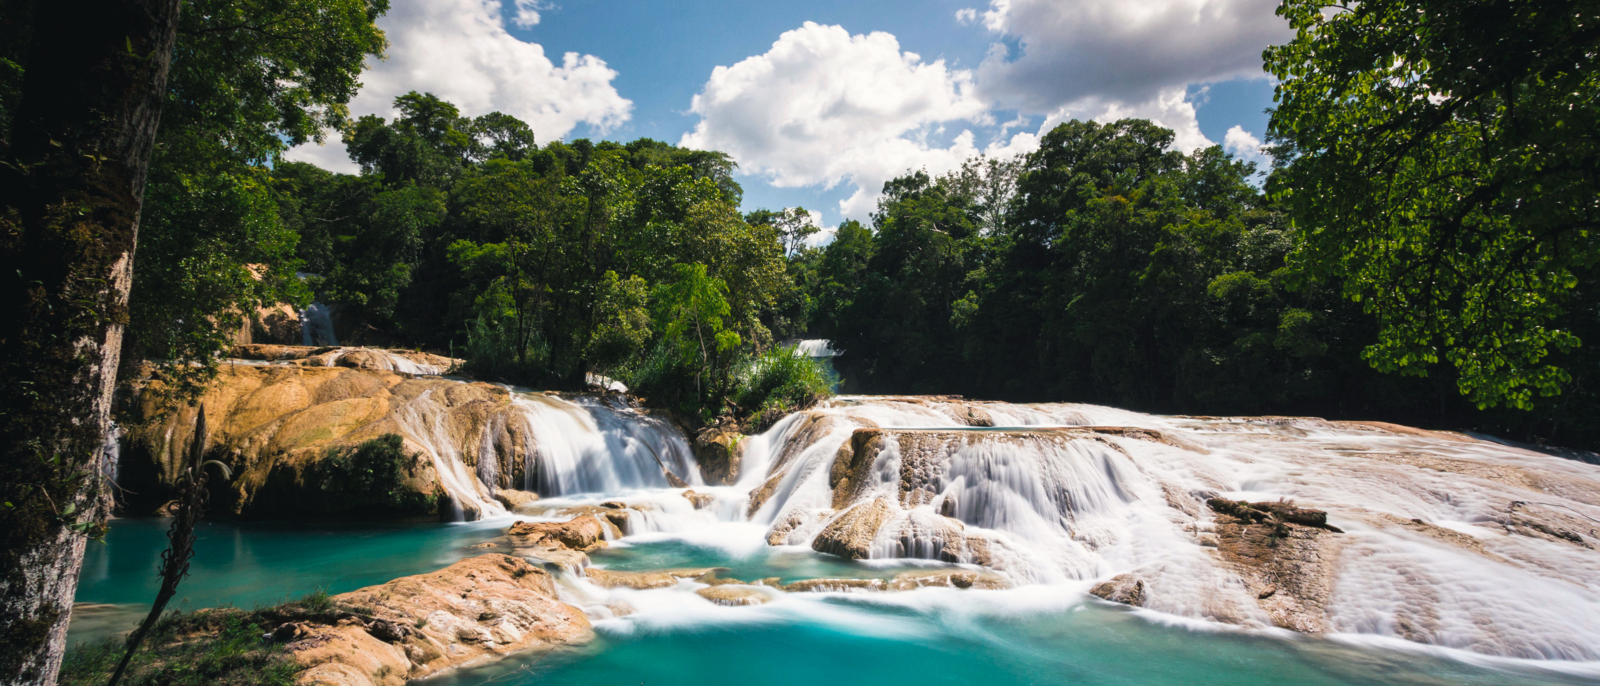 Pretty blue waterfalls of Agua Azul in Chiapas, Mexico. A place where many cataracts create many small sets of waterfalls